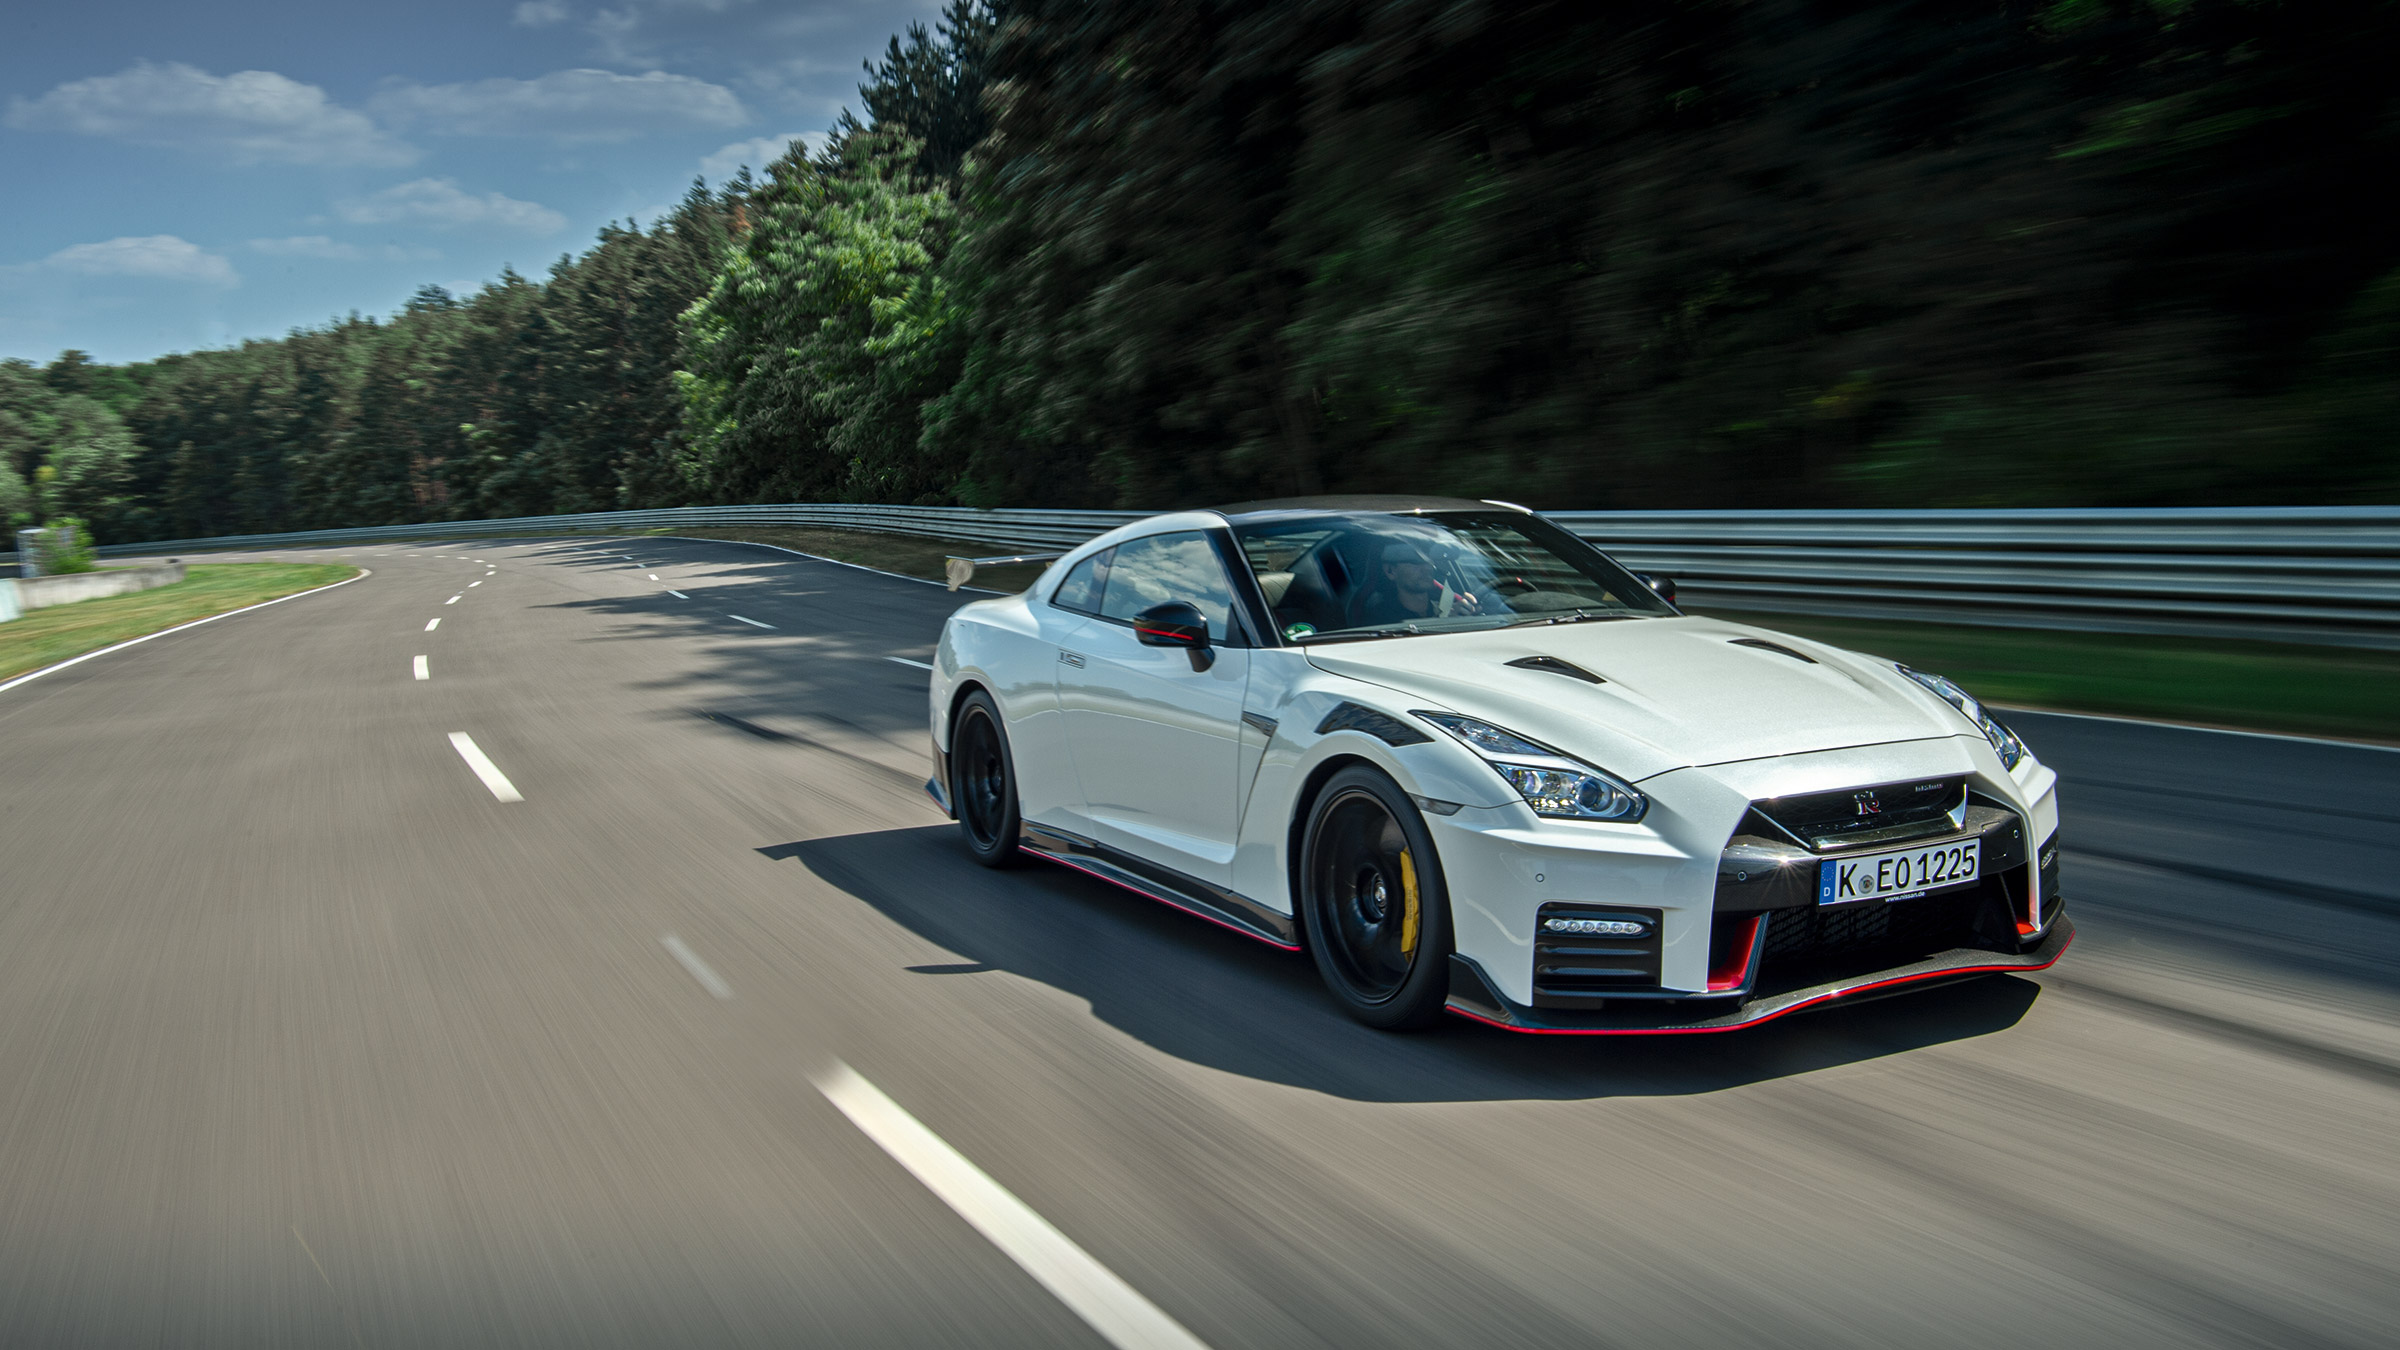 Anyone else think that the new R36 GTR should have a similar price